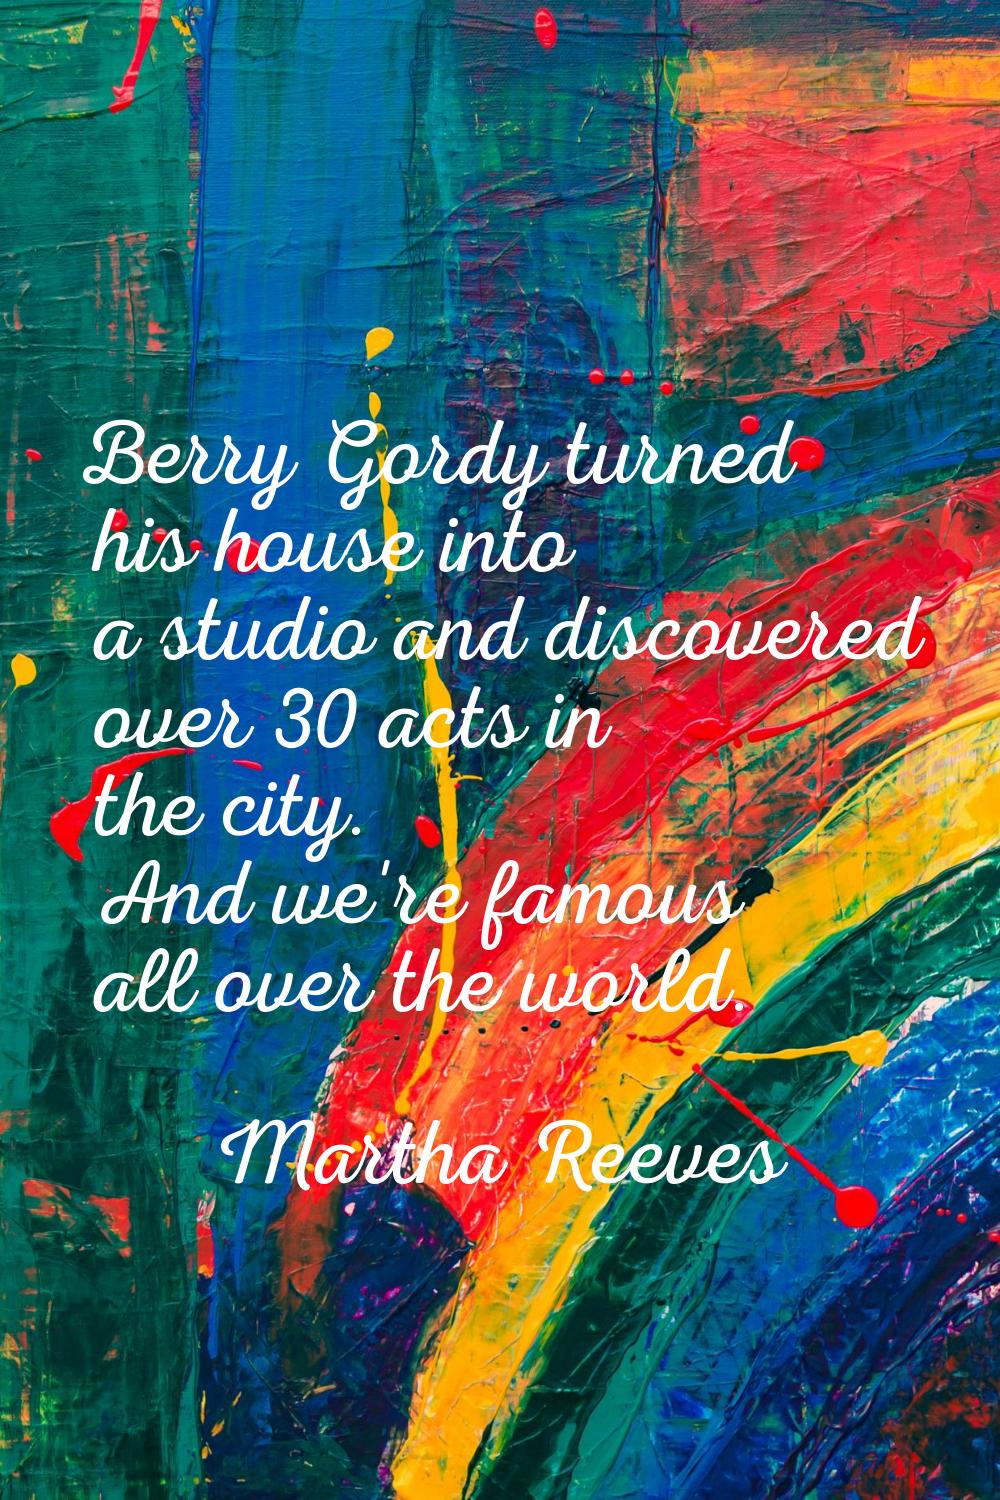 Berry Gordy turned his house into a studio and discovered over 30 acts in the city. And we're famou